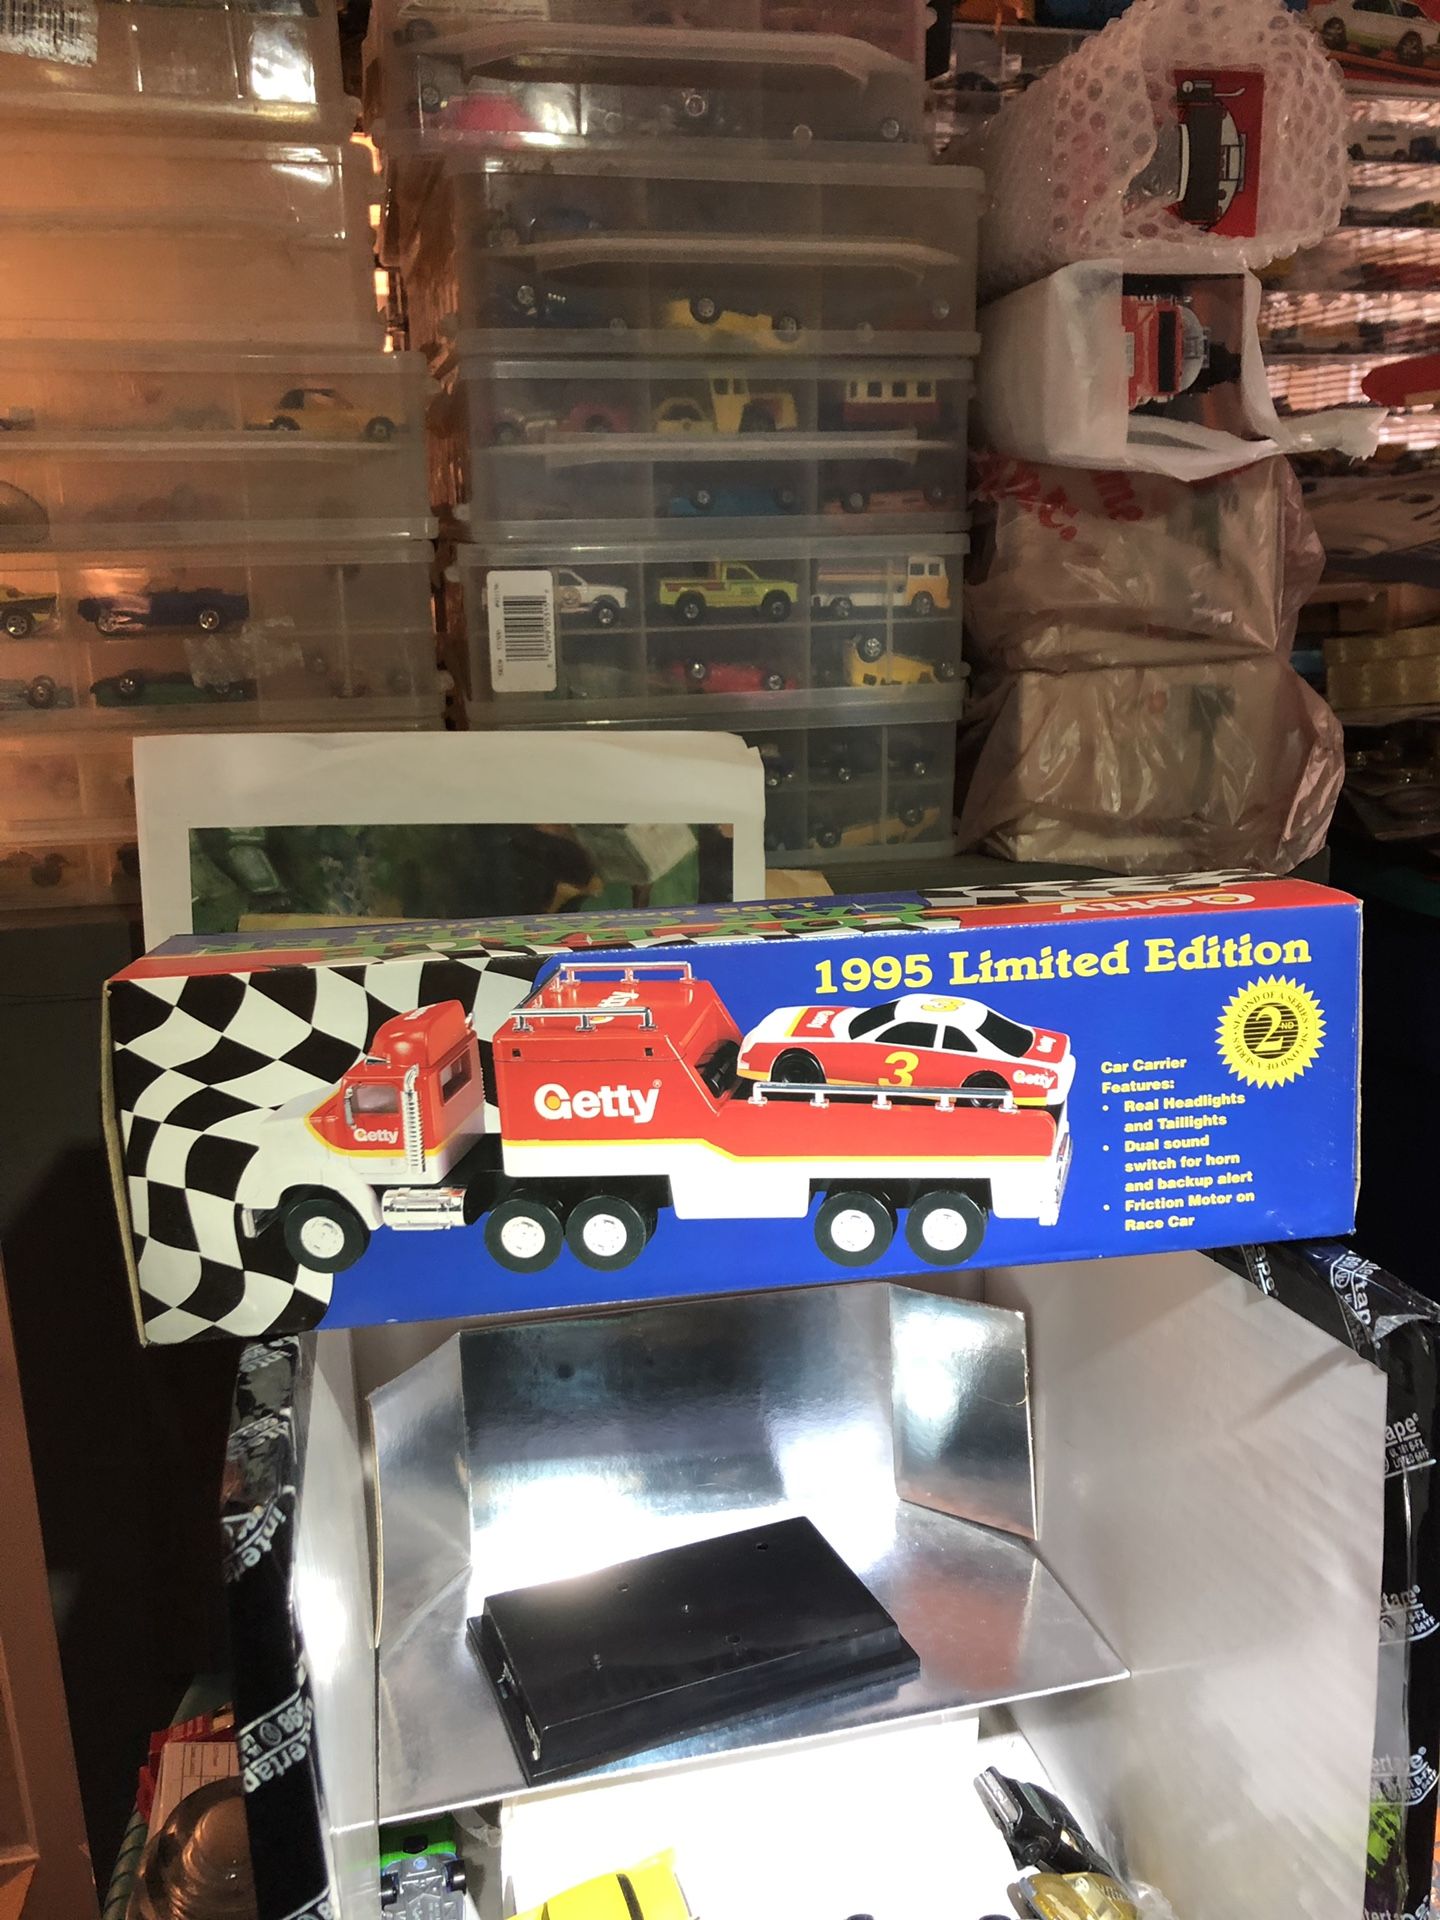 1095 Getty toy collectible truck